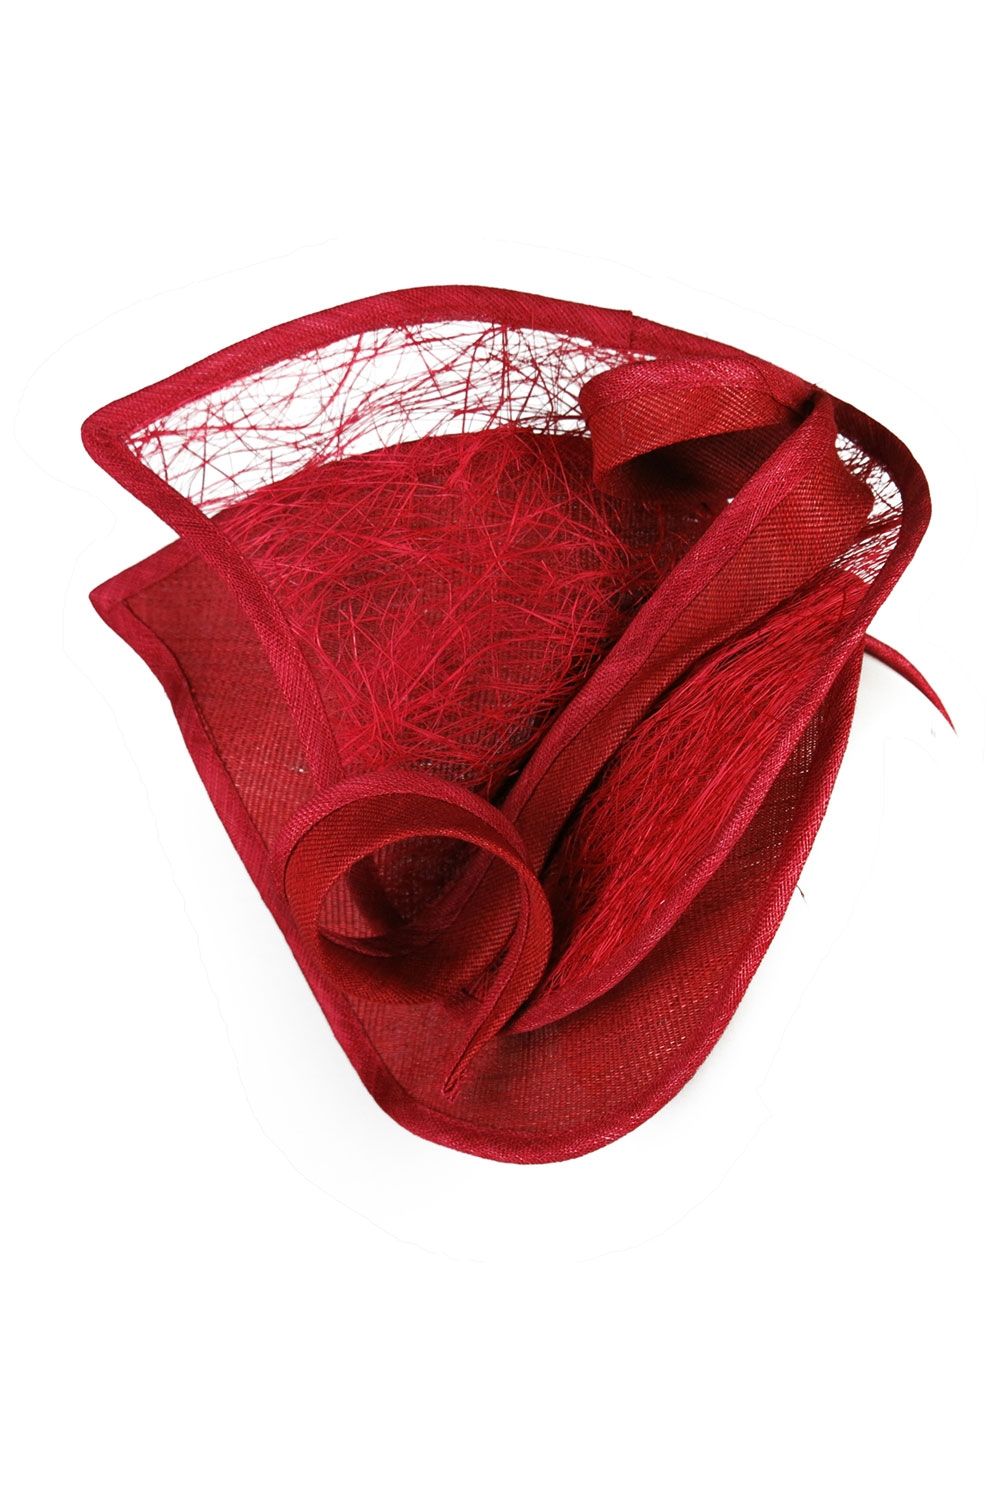 Morgan and Taylor - Addison Fascinator - Red - Top